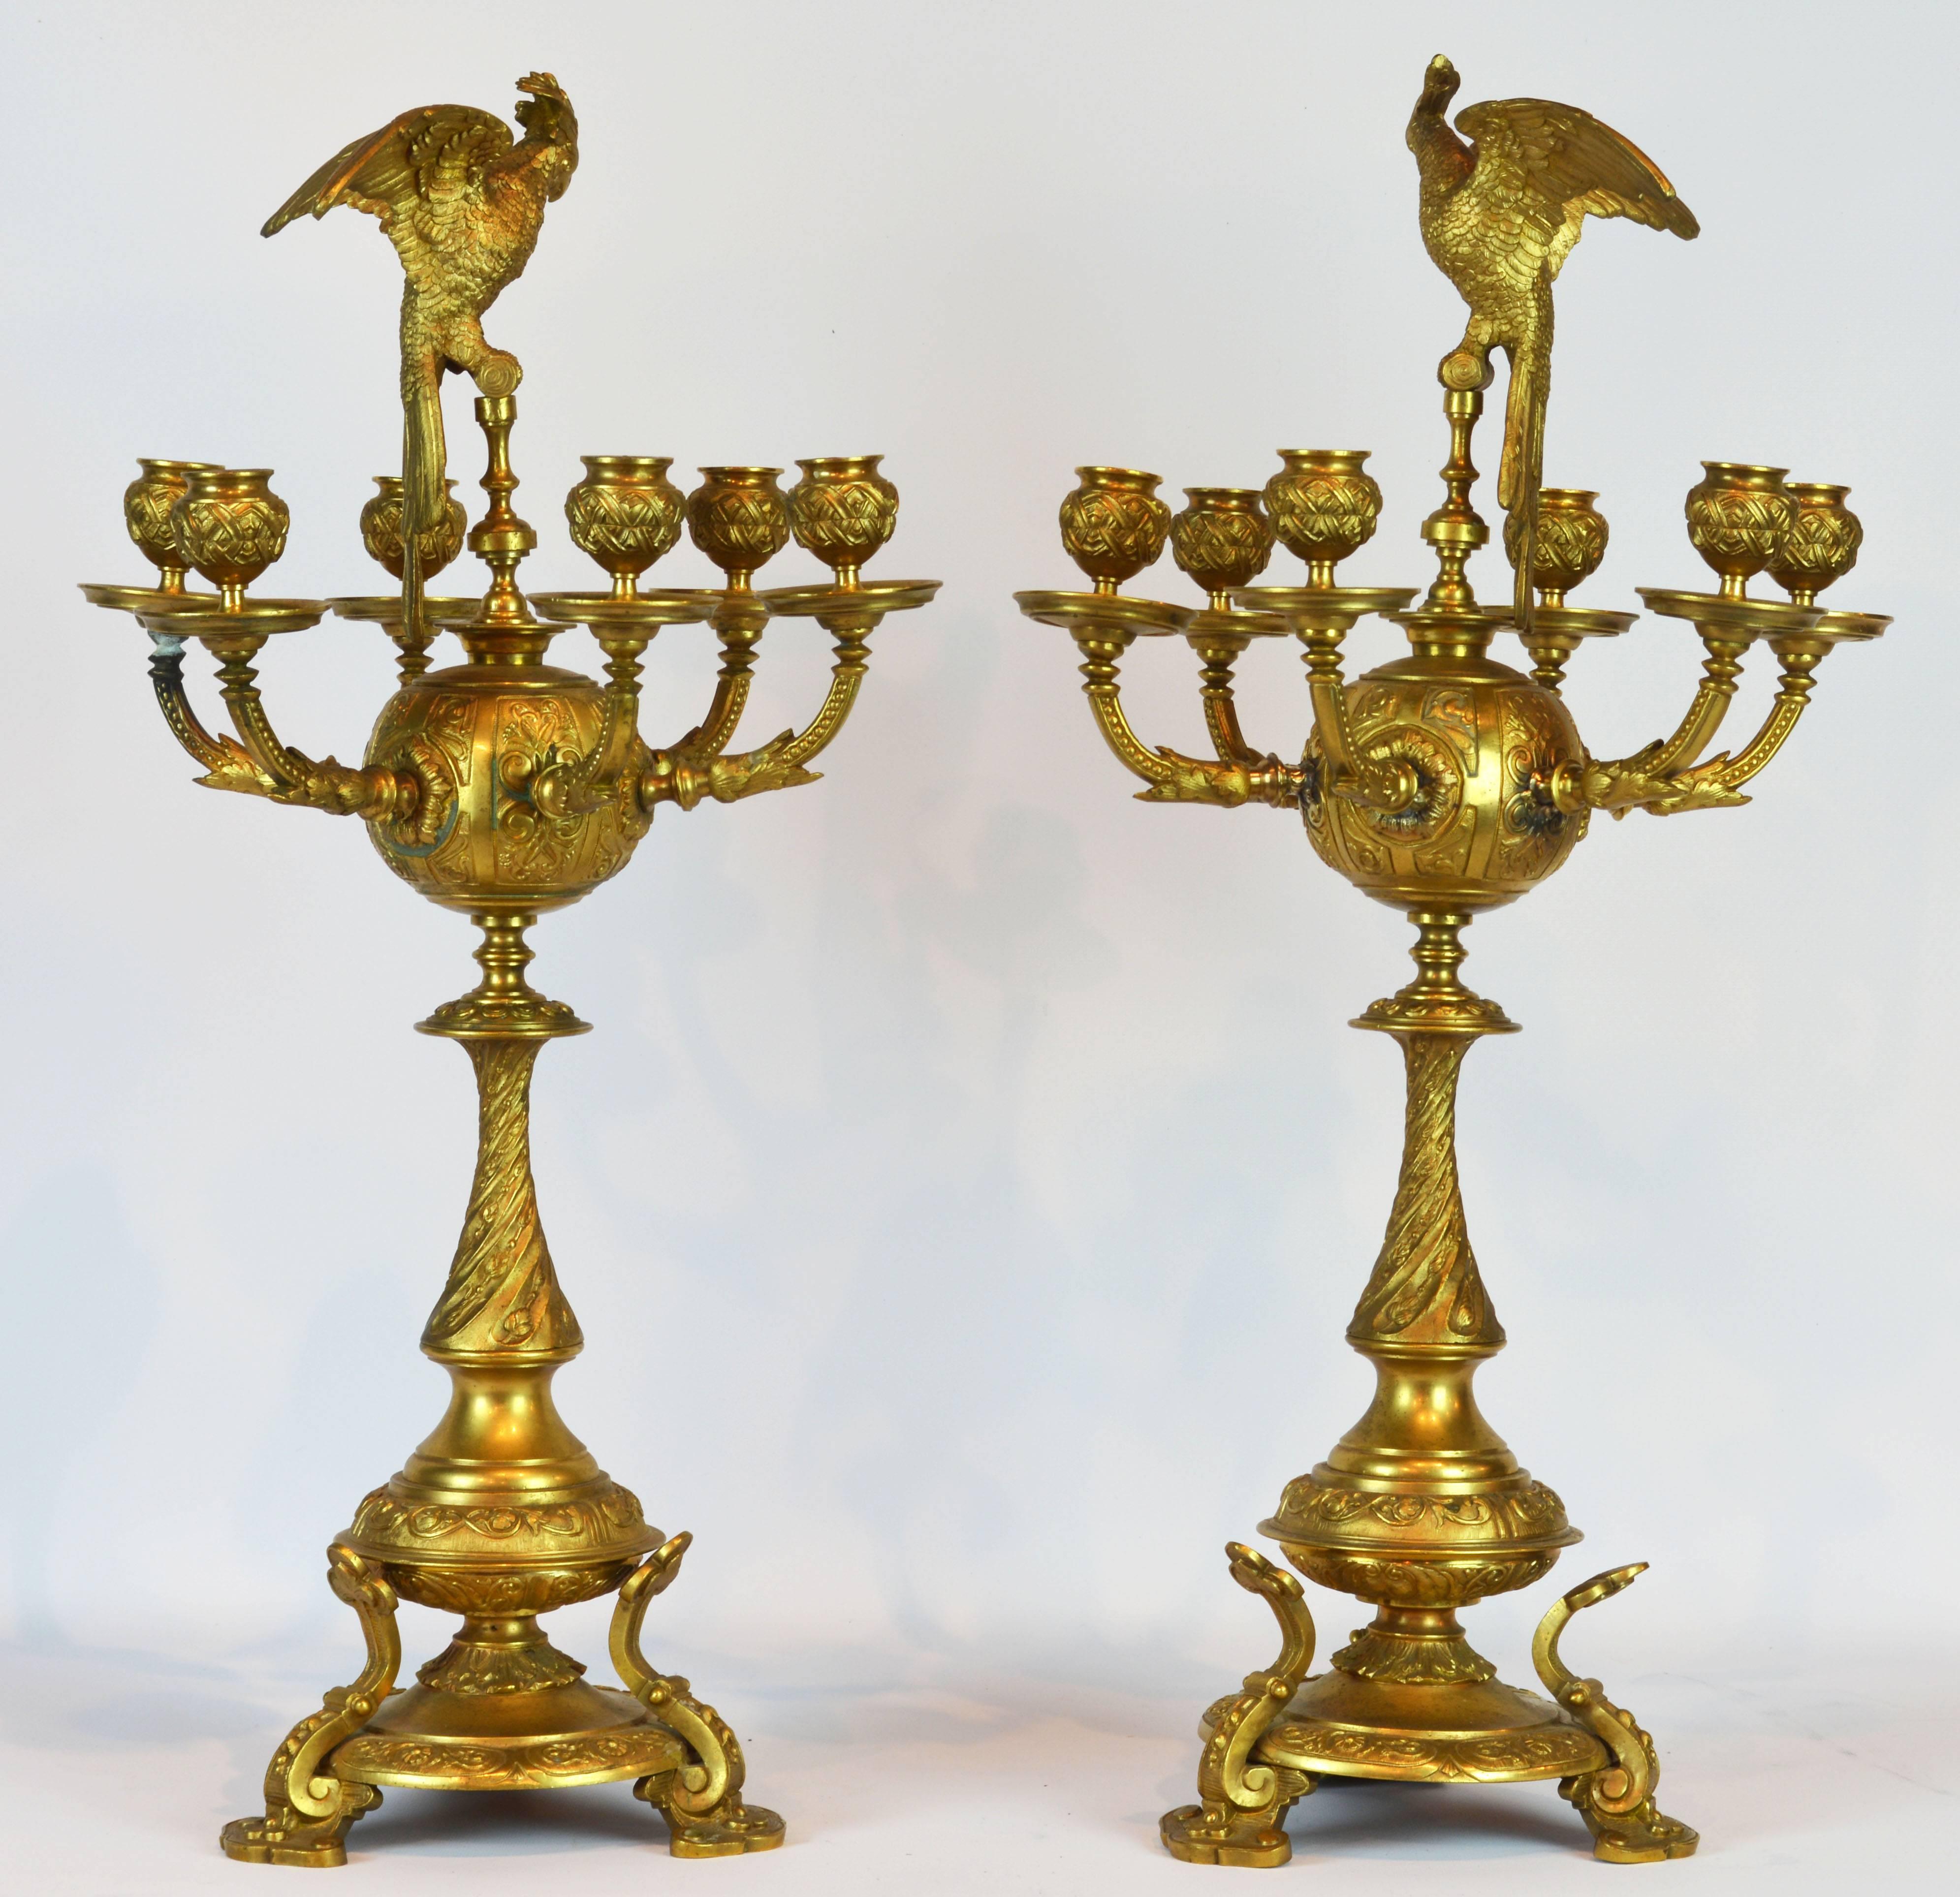 French Pair of Rare Napoleon III Empire Style Gilt Bronze Six Arms Parrot Candelabras